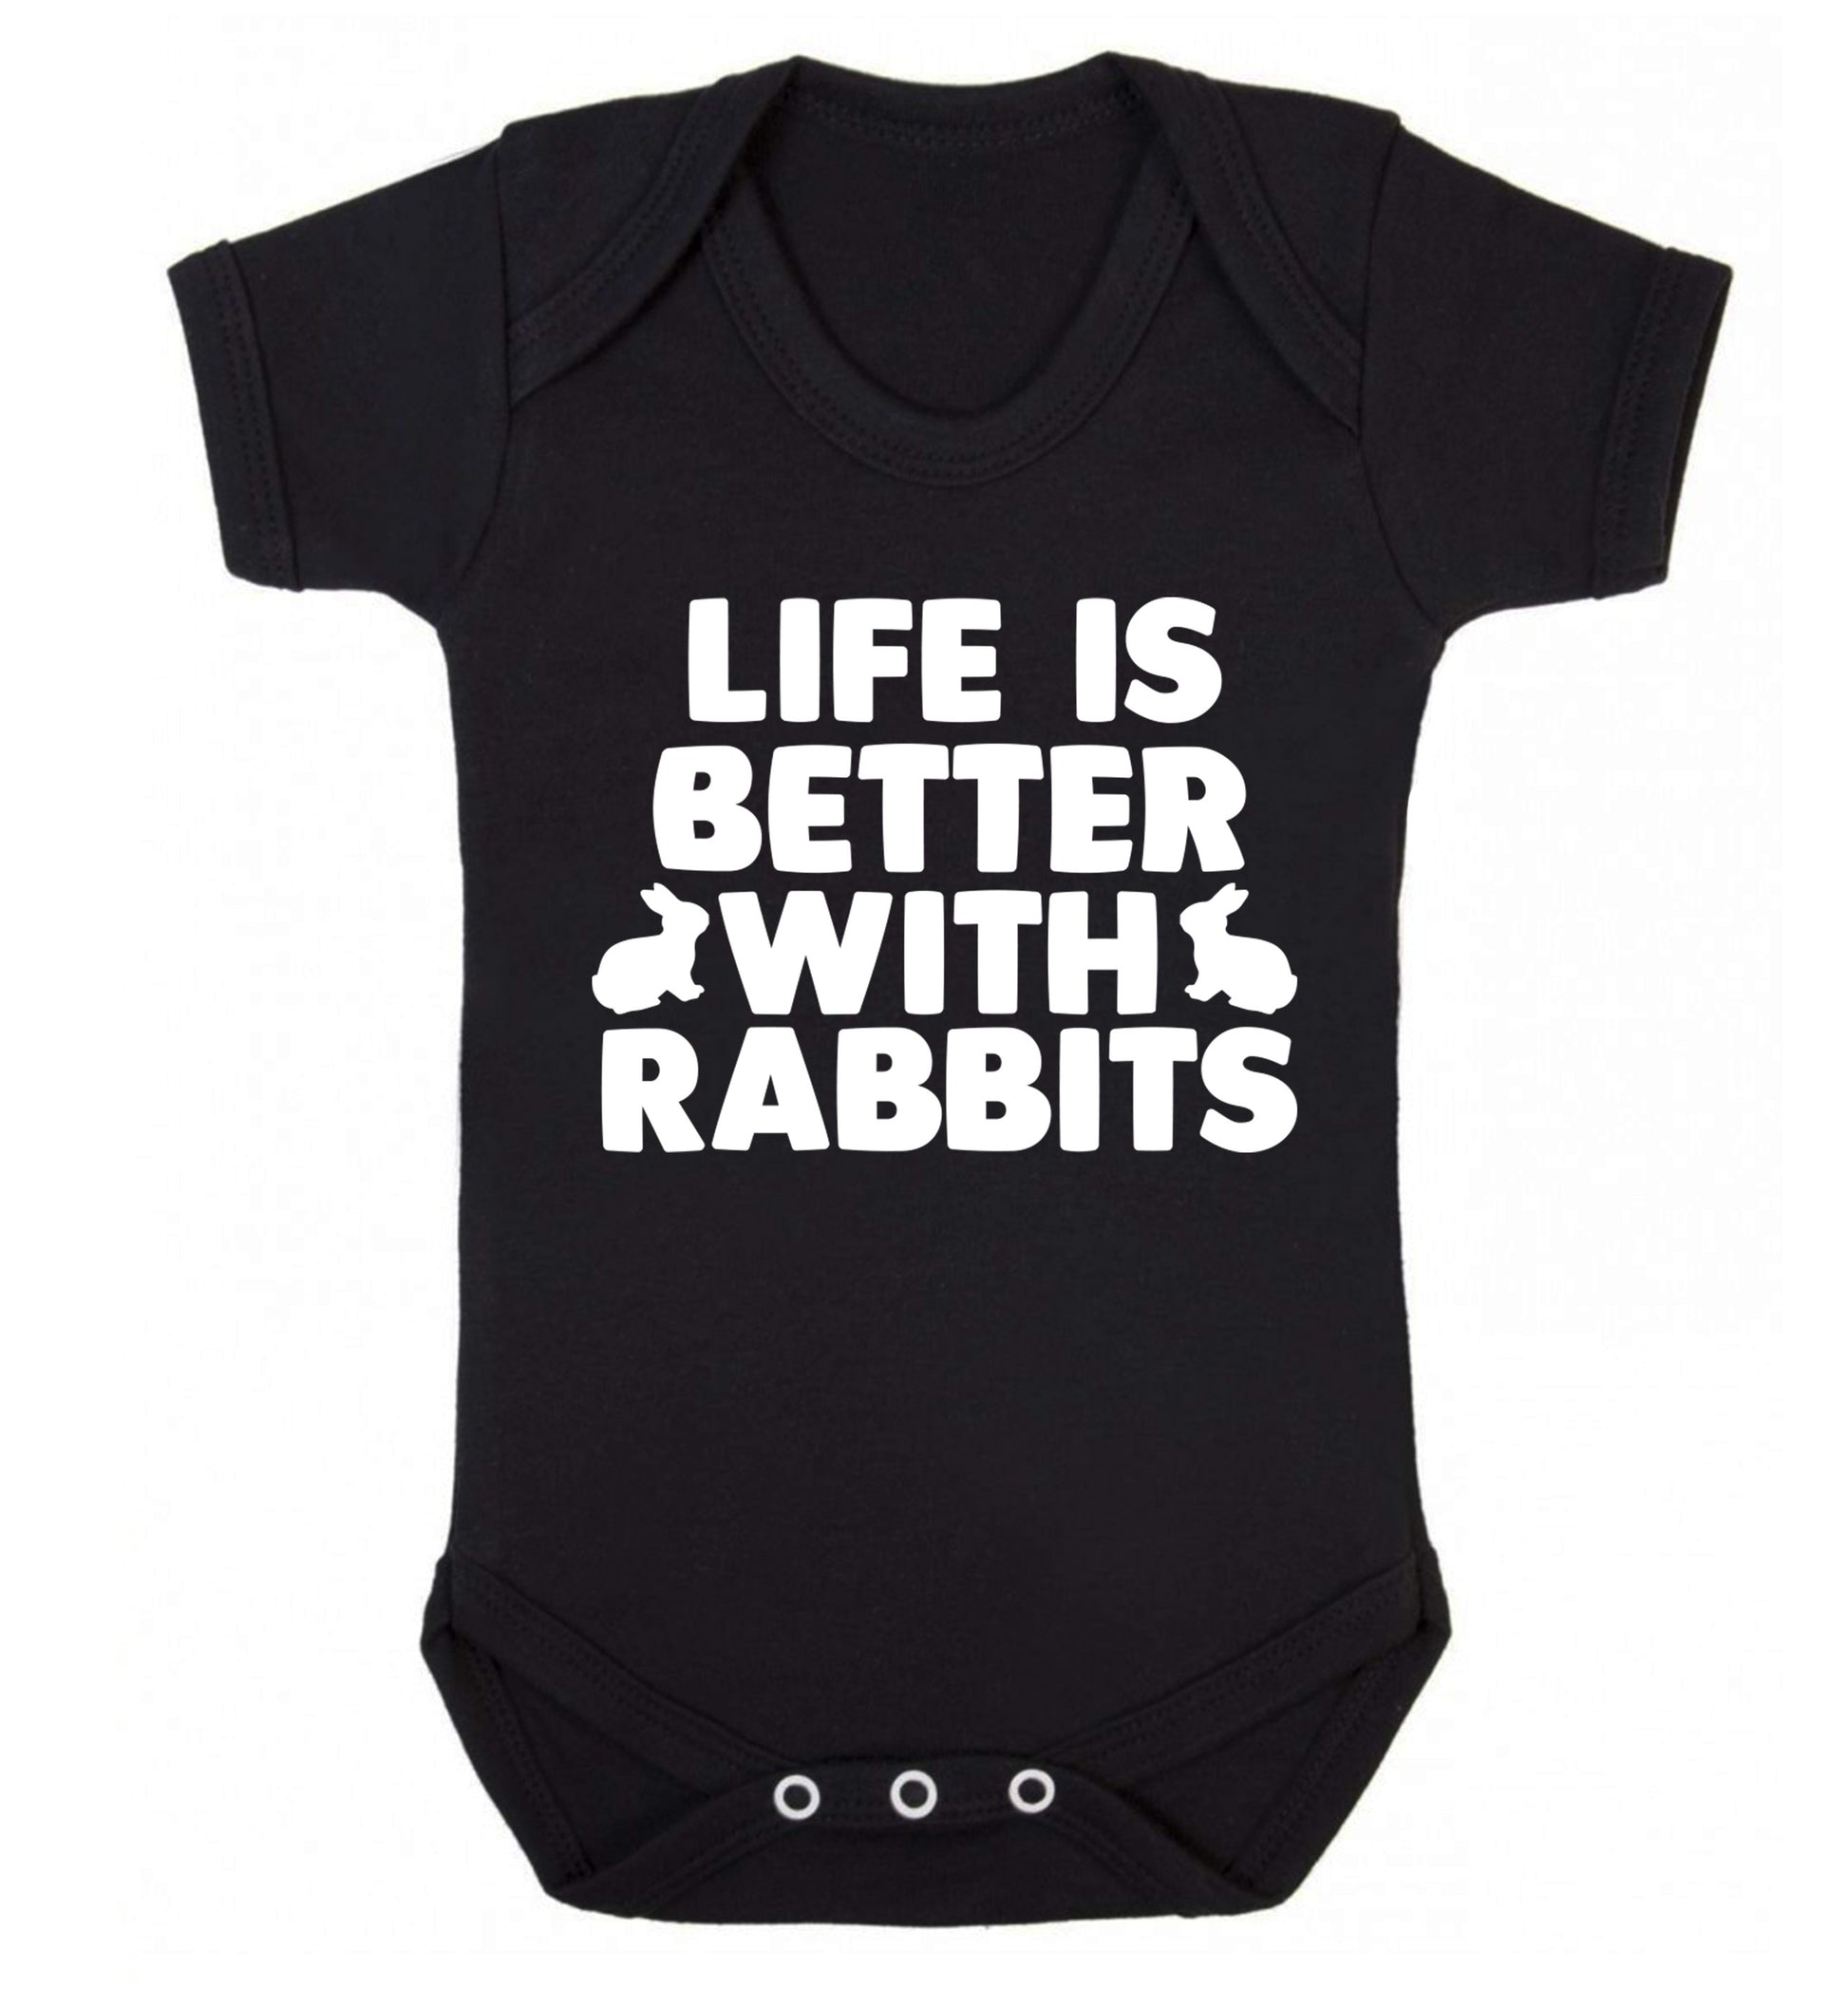 Life is better with rabbits Baby Vest black 18-24 months